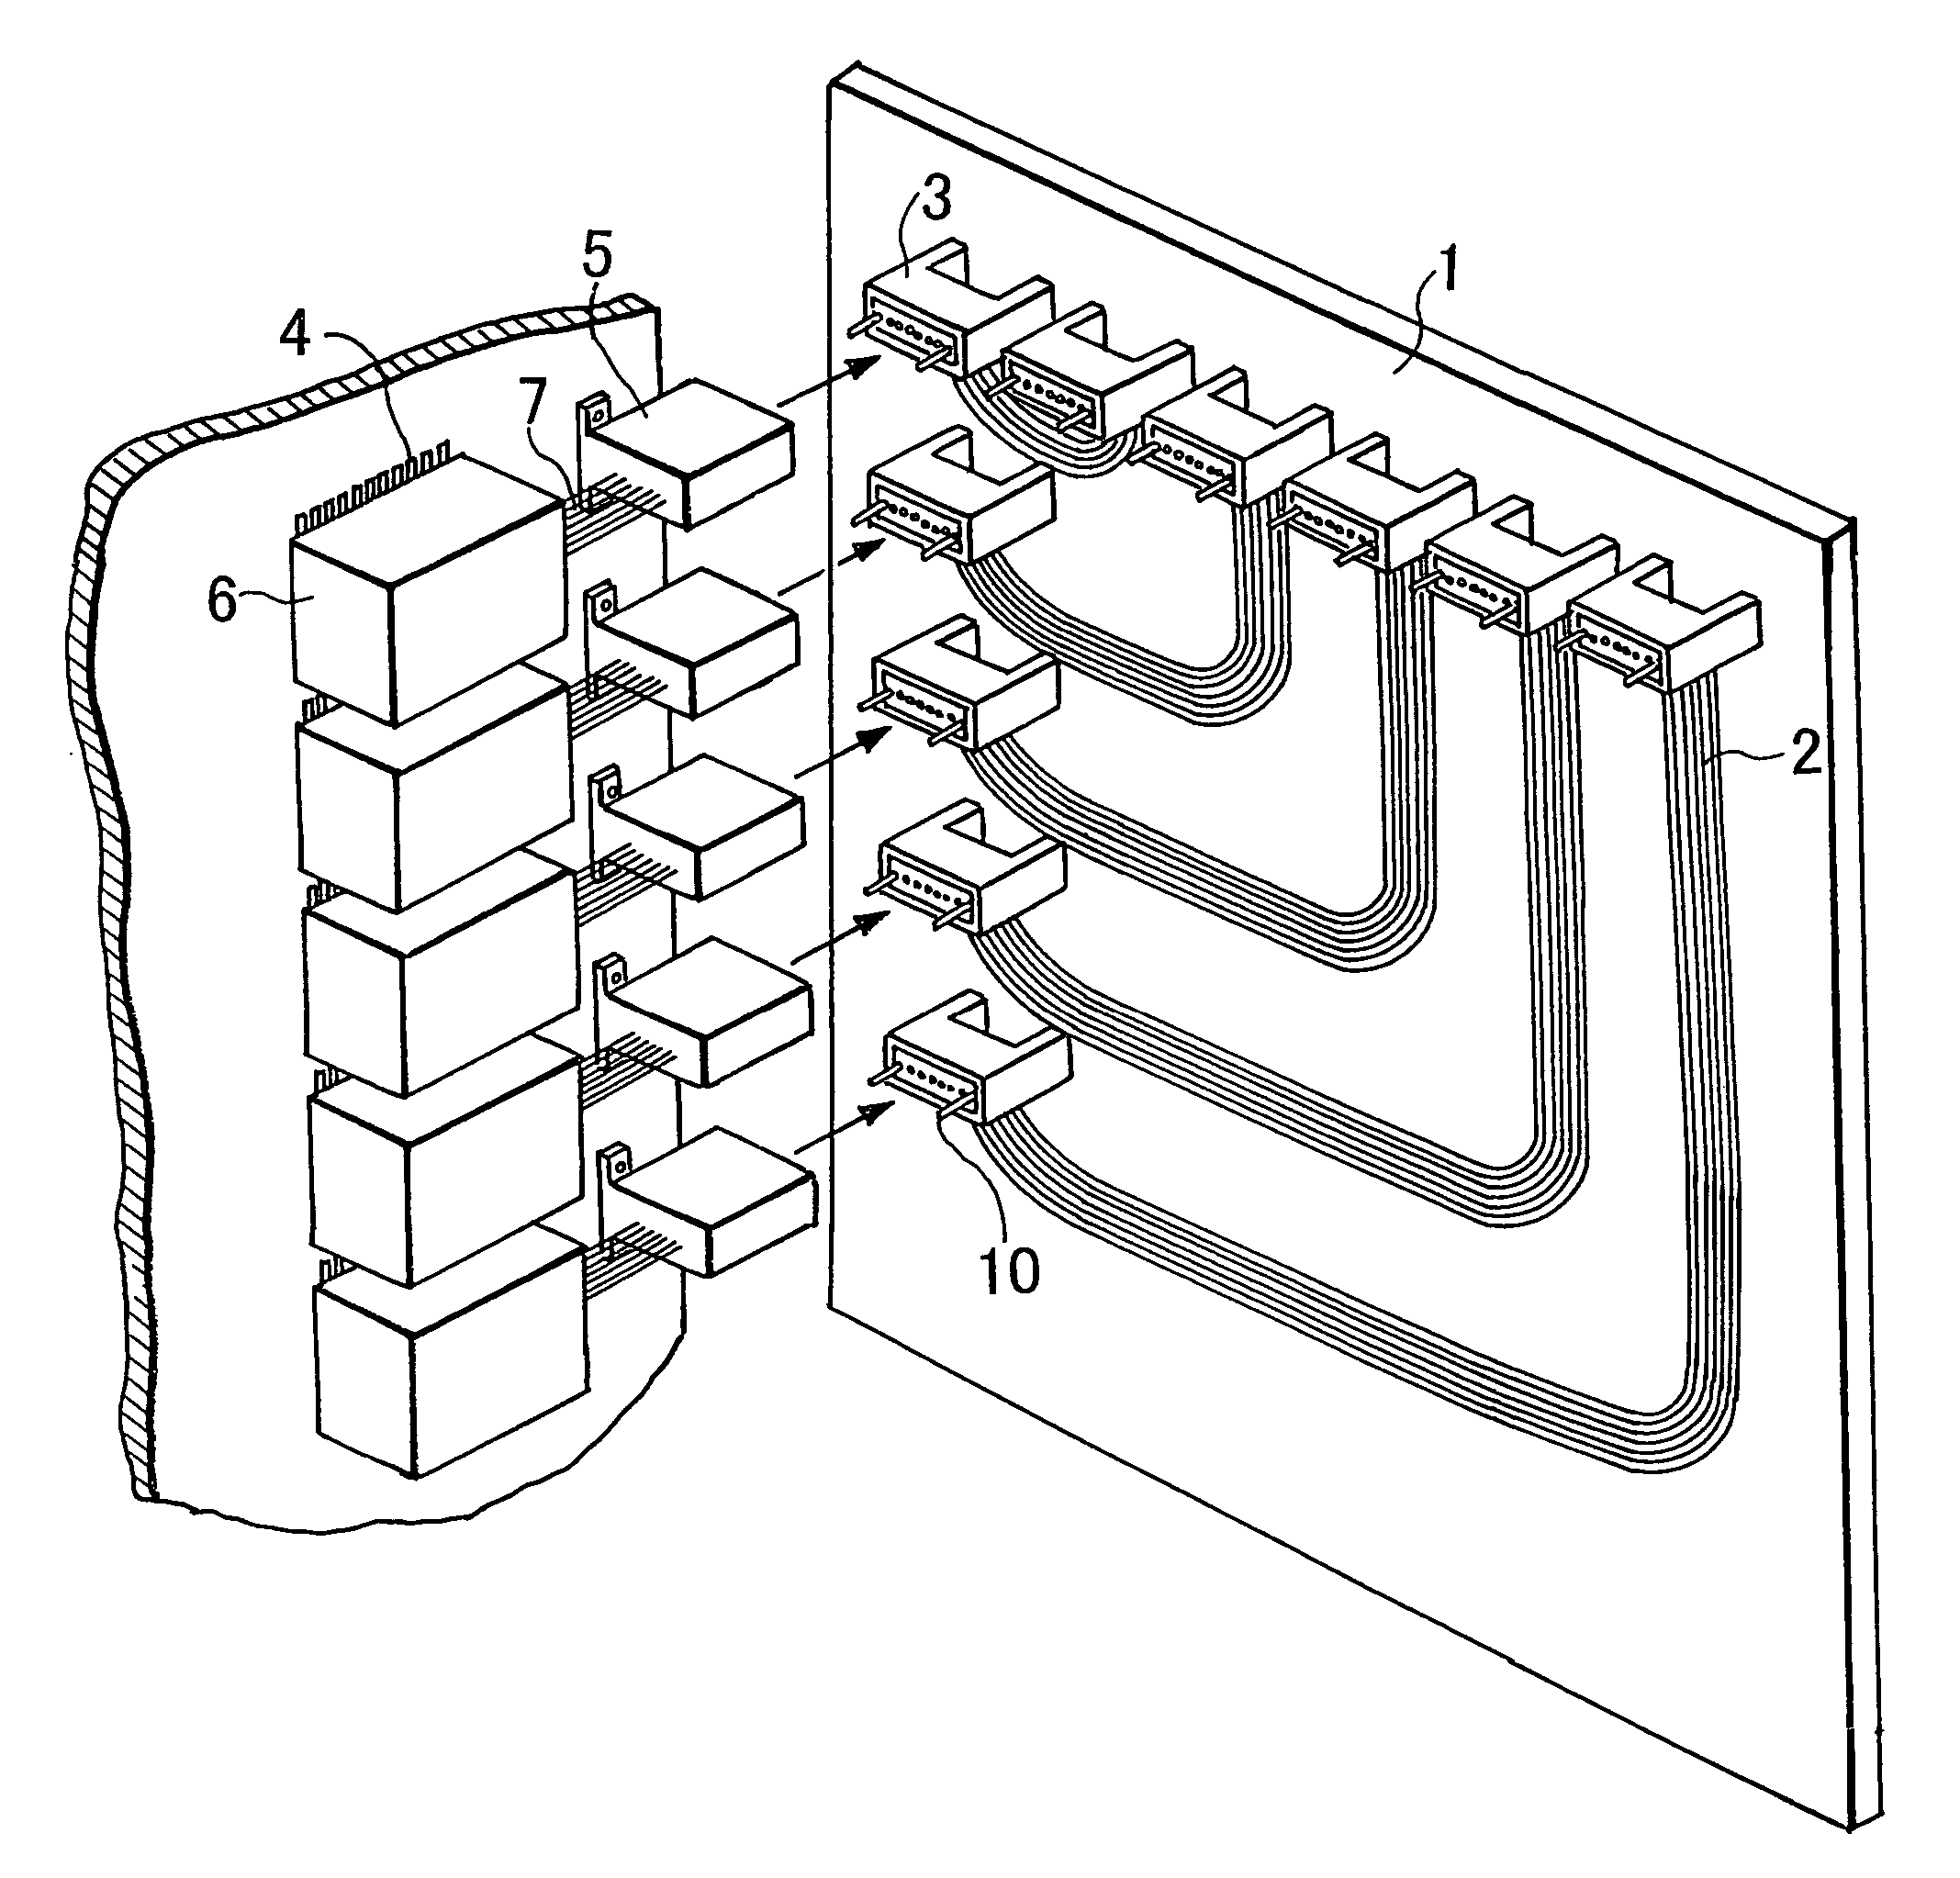 Optical connection structure between optical backplane and circuit substrate